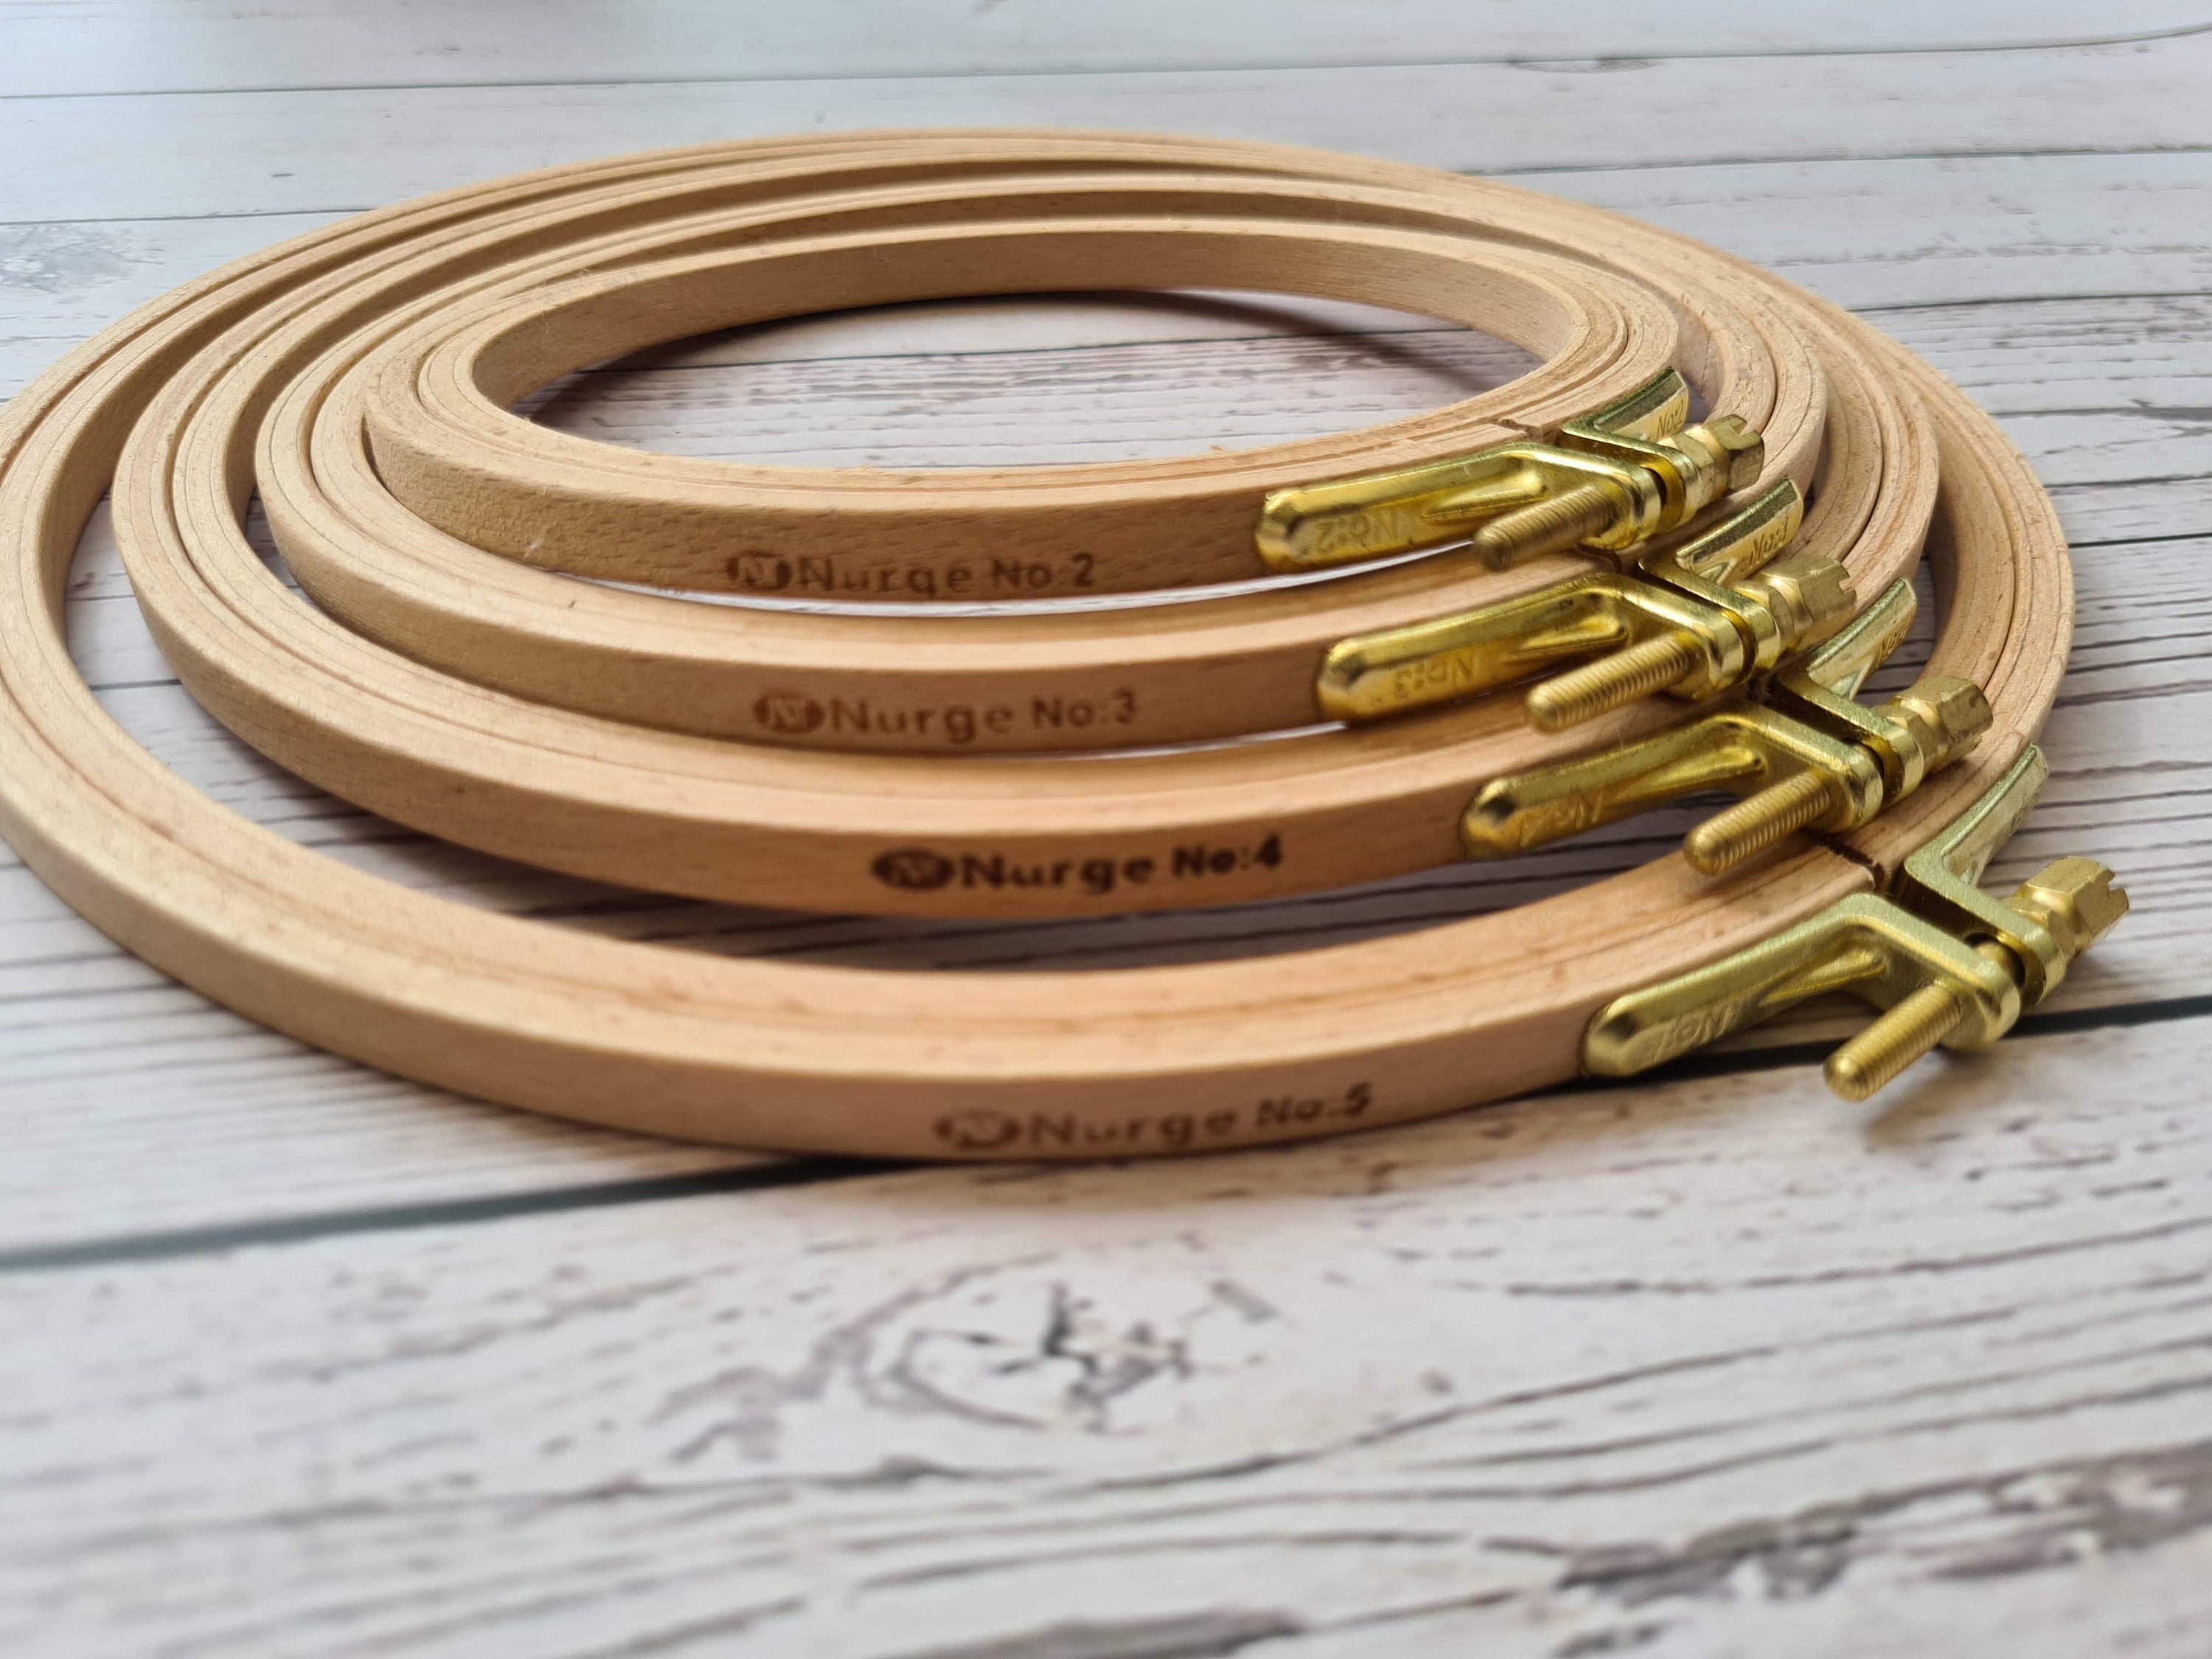 Nurge Premium Beech Wood Gold Clasp Quilting Hoop 8 Inches/22cm Diameter -  16mm Thick